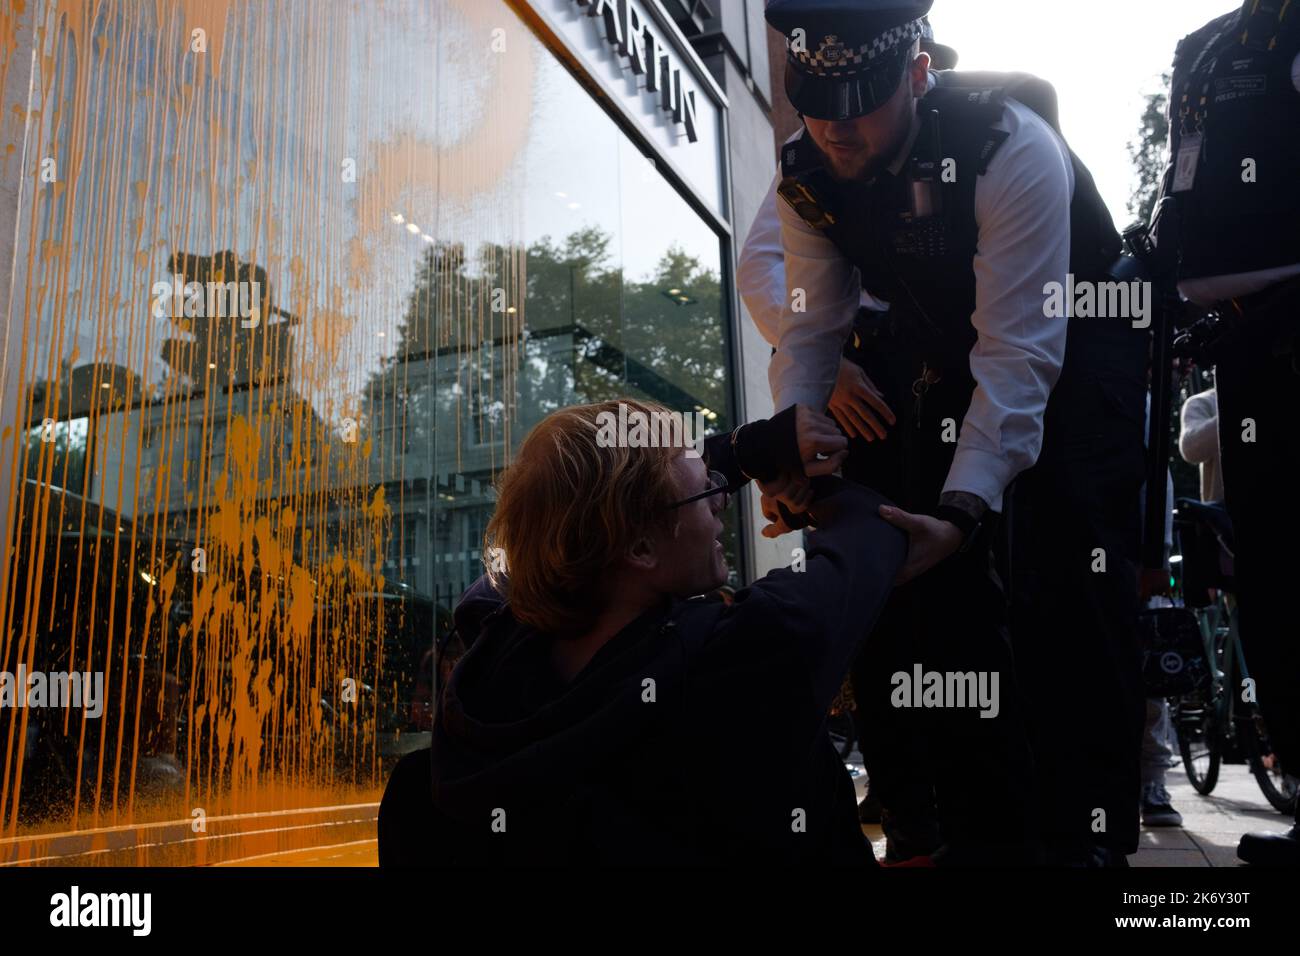 London, UK. 16 OCT, 2022. Just Stop Oil activists covered the Aston Martin showroom in Park Lane with orange paint and blocked the road. Members of the public drag an activists who are blocking the road. Police officers detain an activist after paint was thrown over a car showroom window. Credit: Joao Daniel Pereira/Alamy Live News Stock Photo